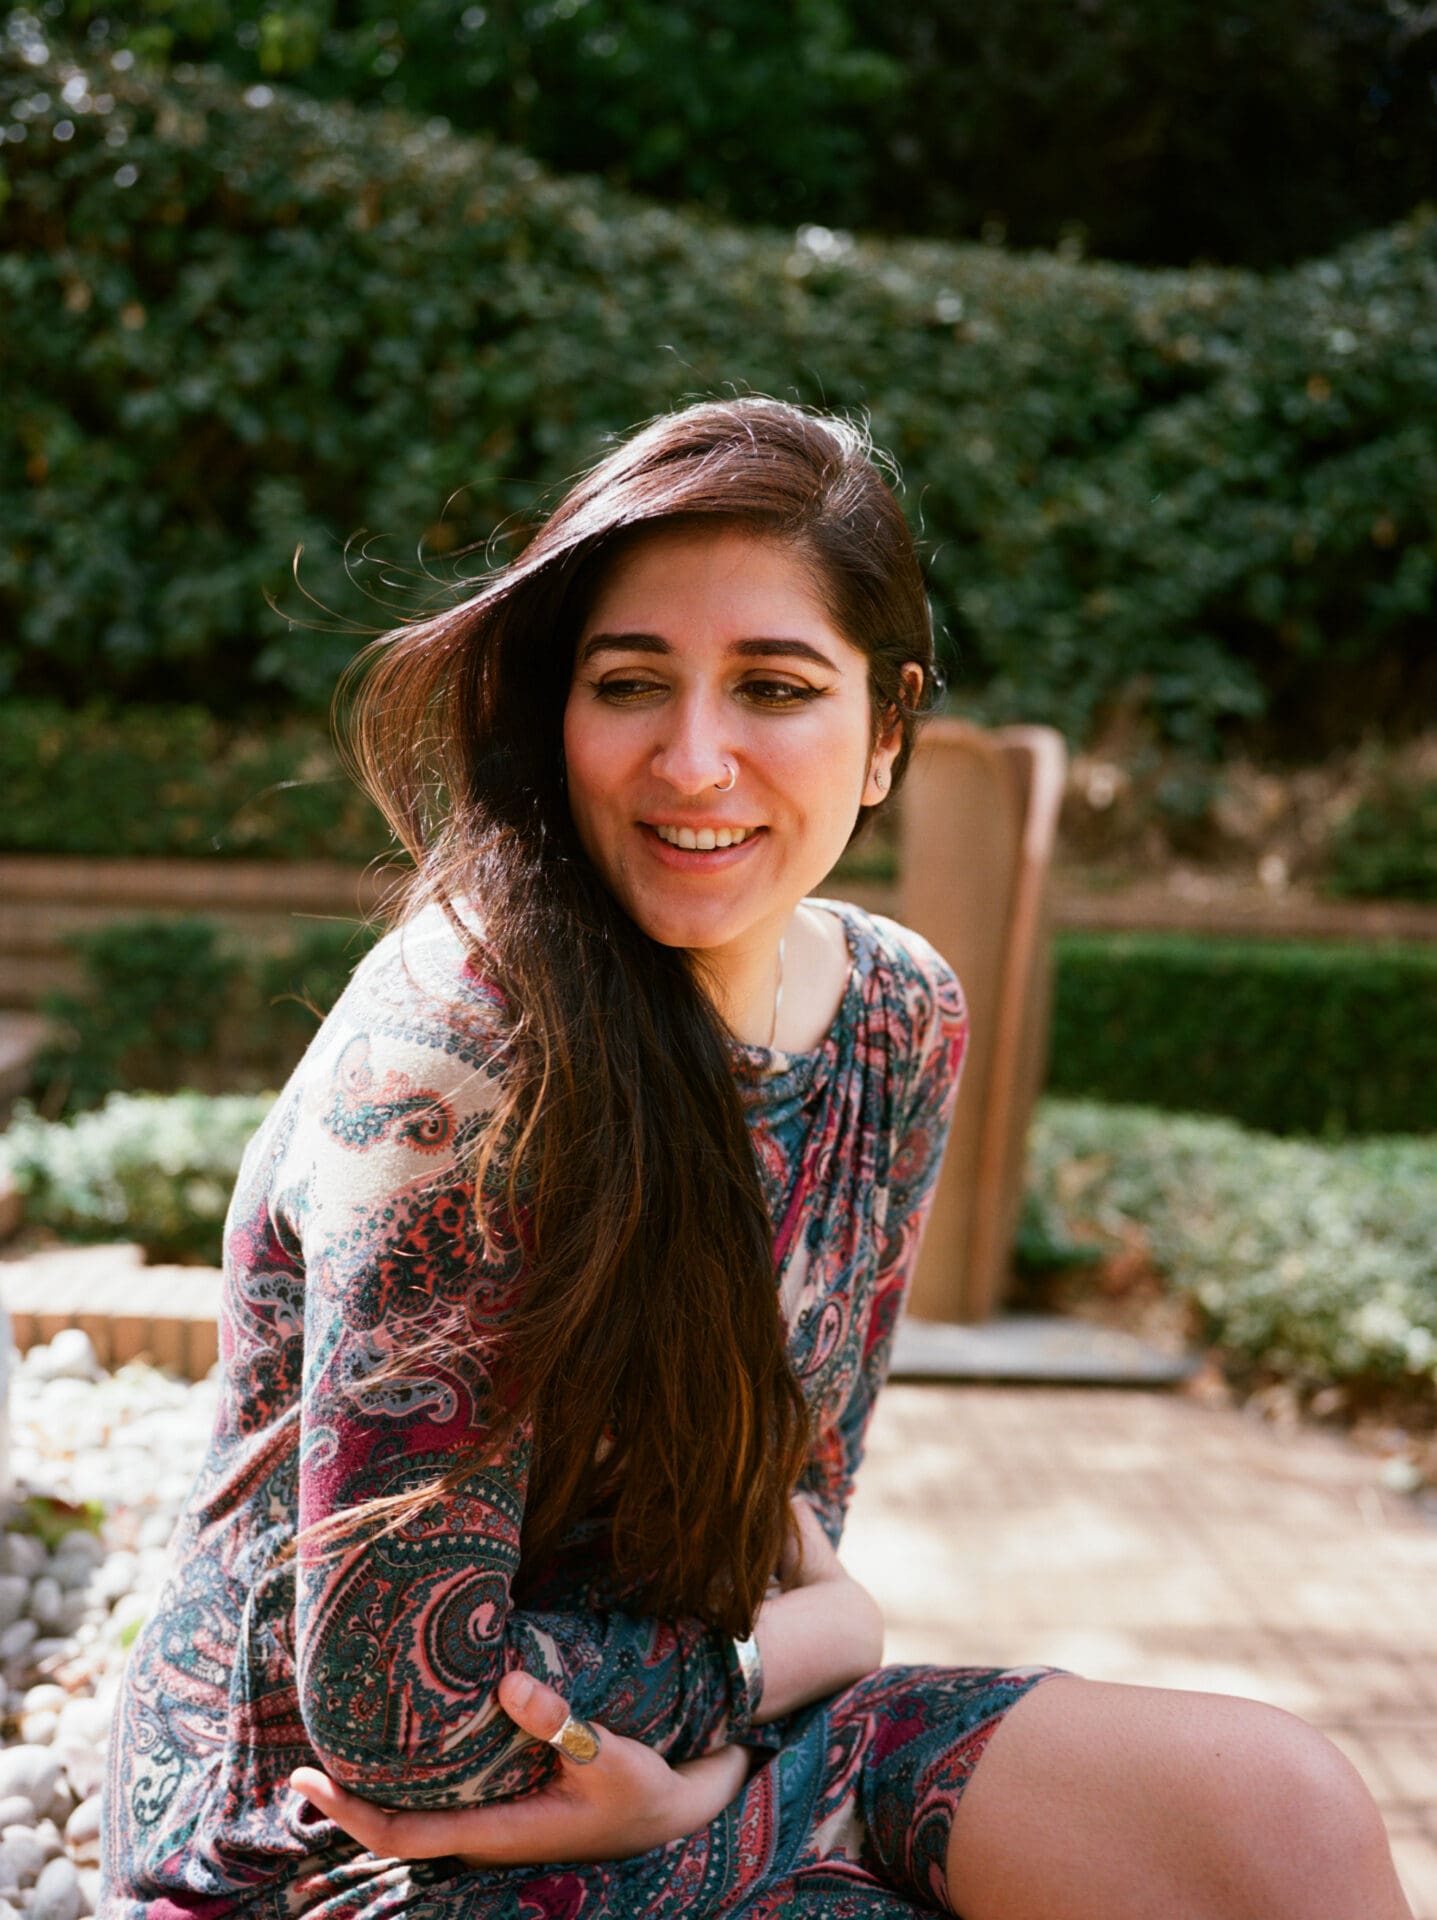 An interview with poet Nikita Gill | Nikita Gill sits outside with her arms folded.